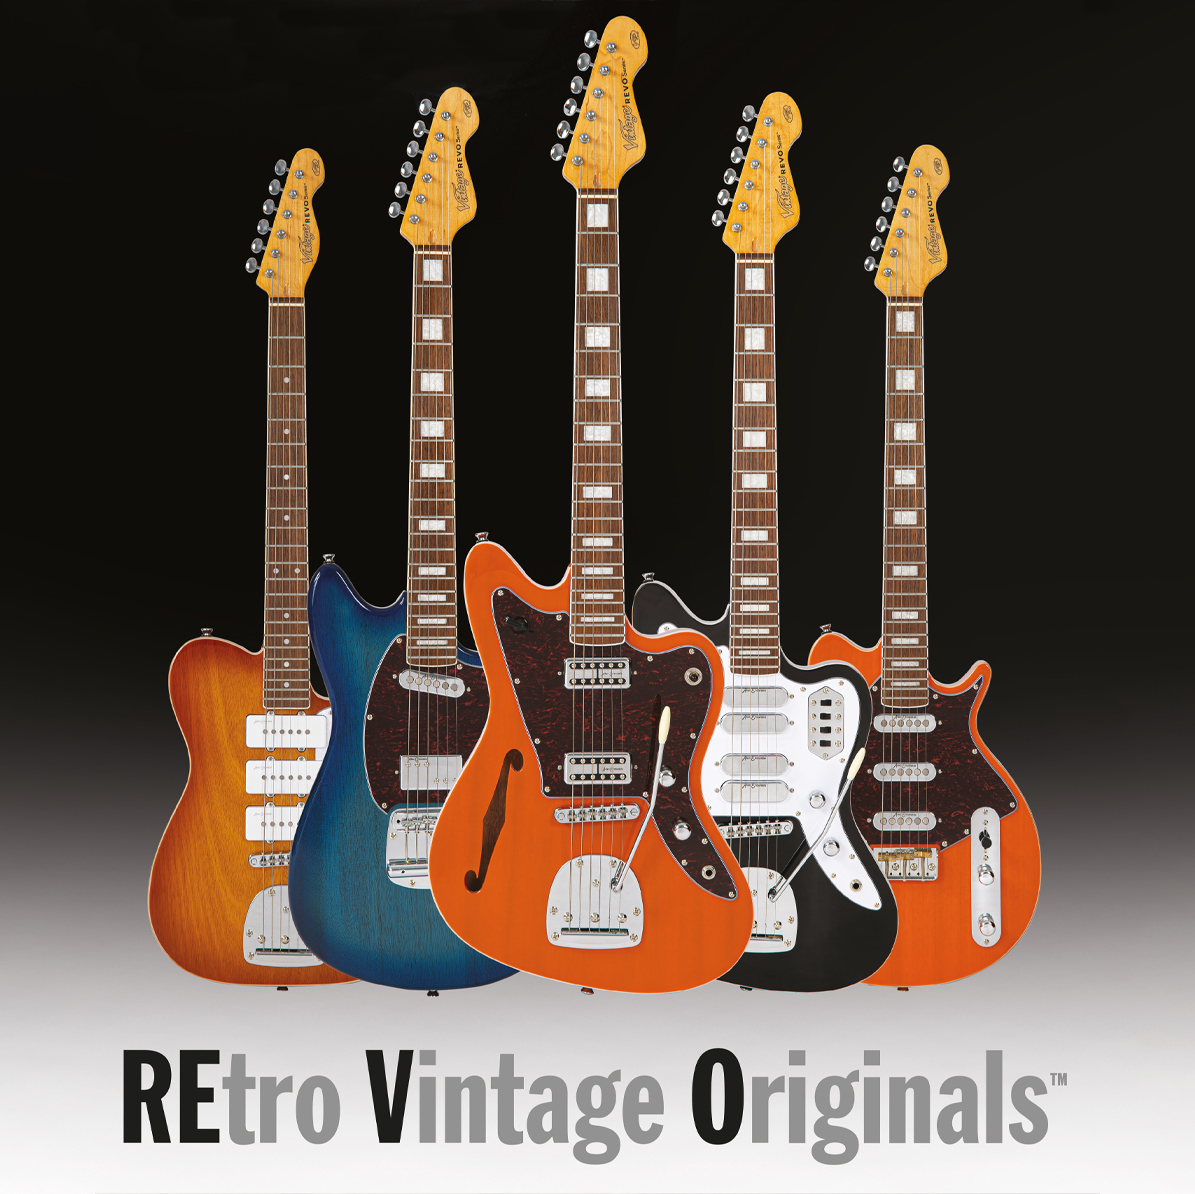 Be one of the first to check out the New Vintage® REVO Series guitars at The London International Guitar Show. Sunday 29th October, Kempton Park Racecourse. guitarshows.co.uk/ARPages/London… @NrthGuitarShows